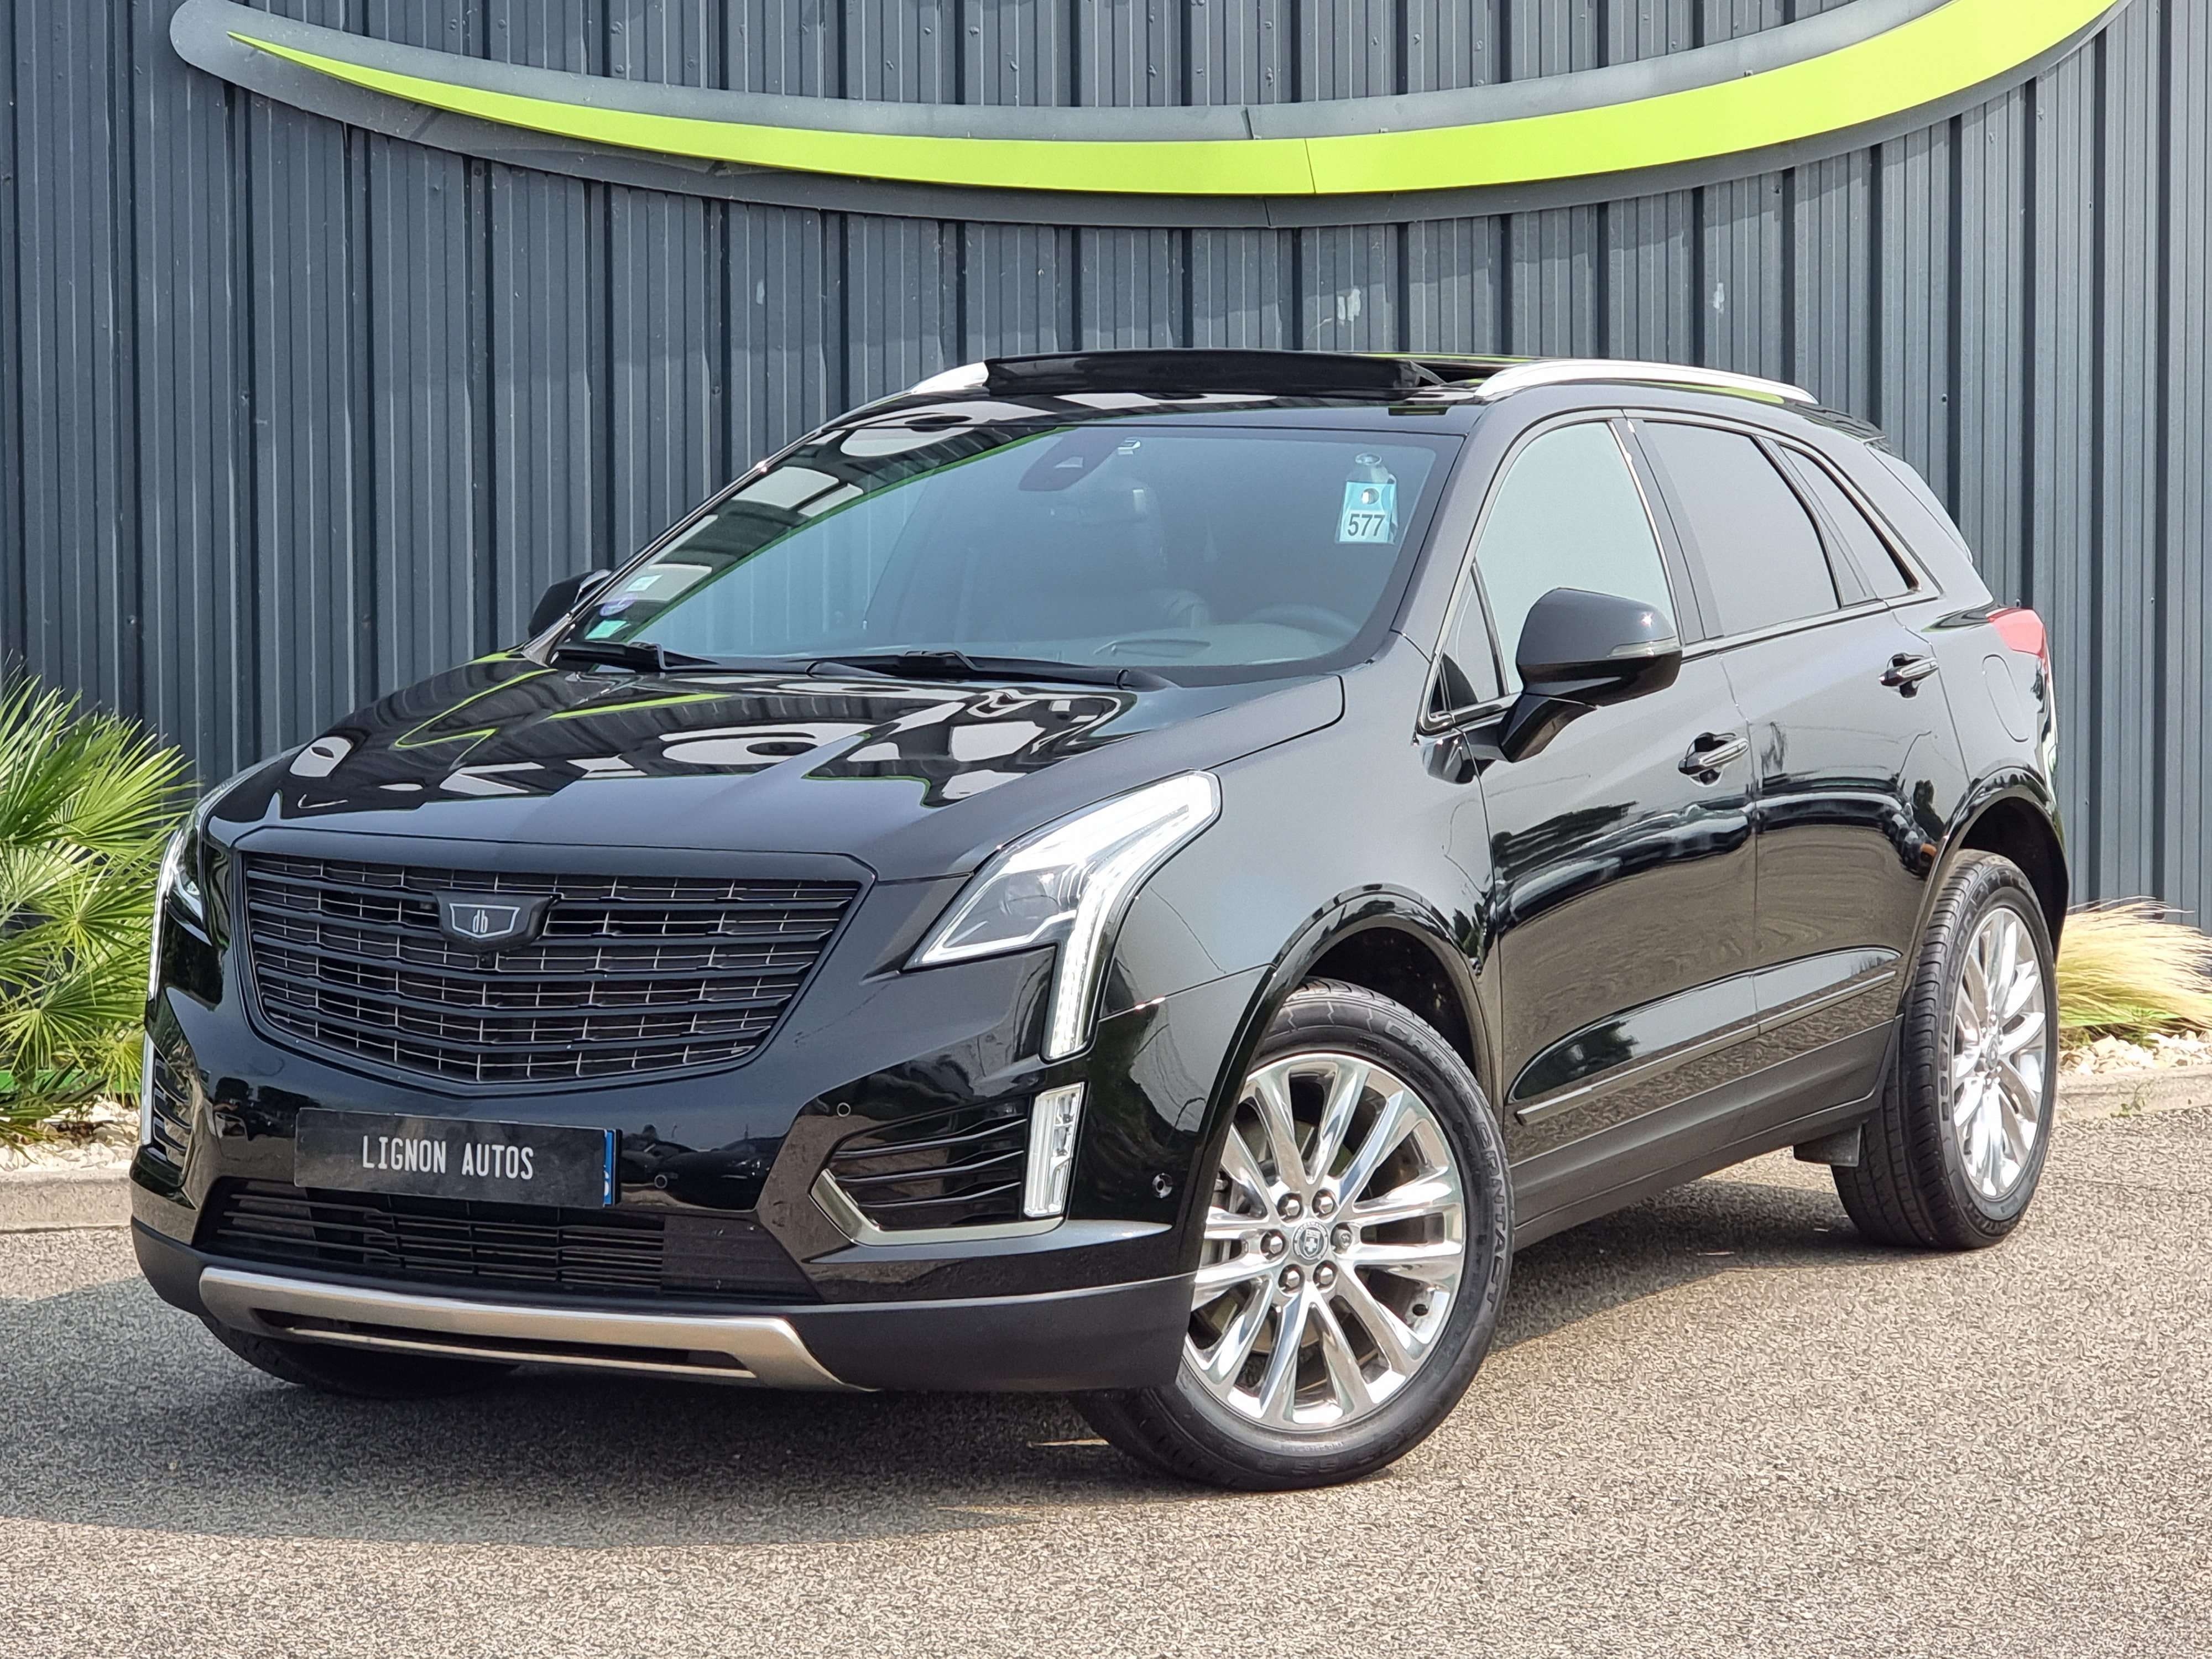 Cadillac SRX Off-Road/Pick-up in Black used in ETOILE-SUR-RHONE for € 38,990.-